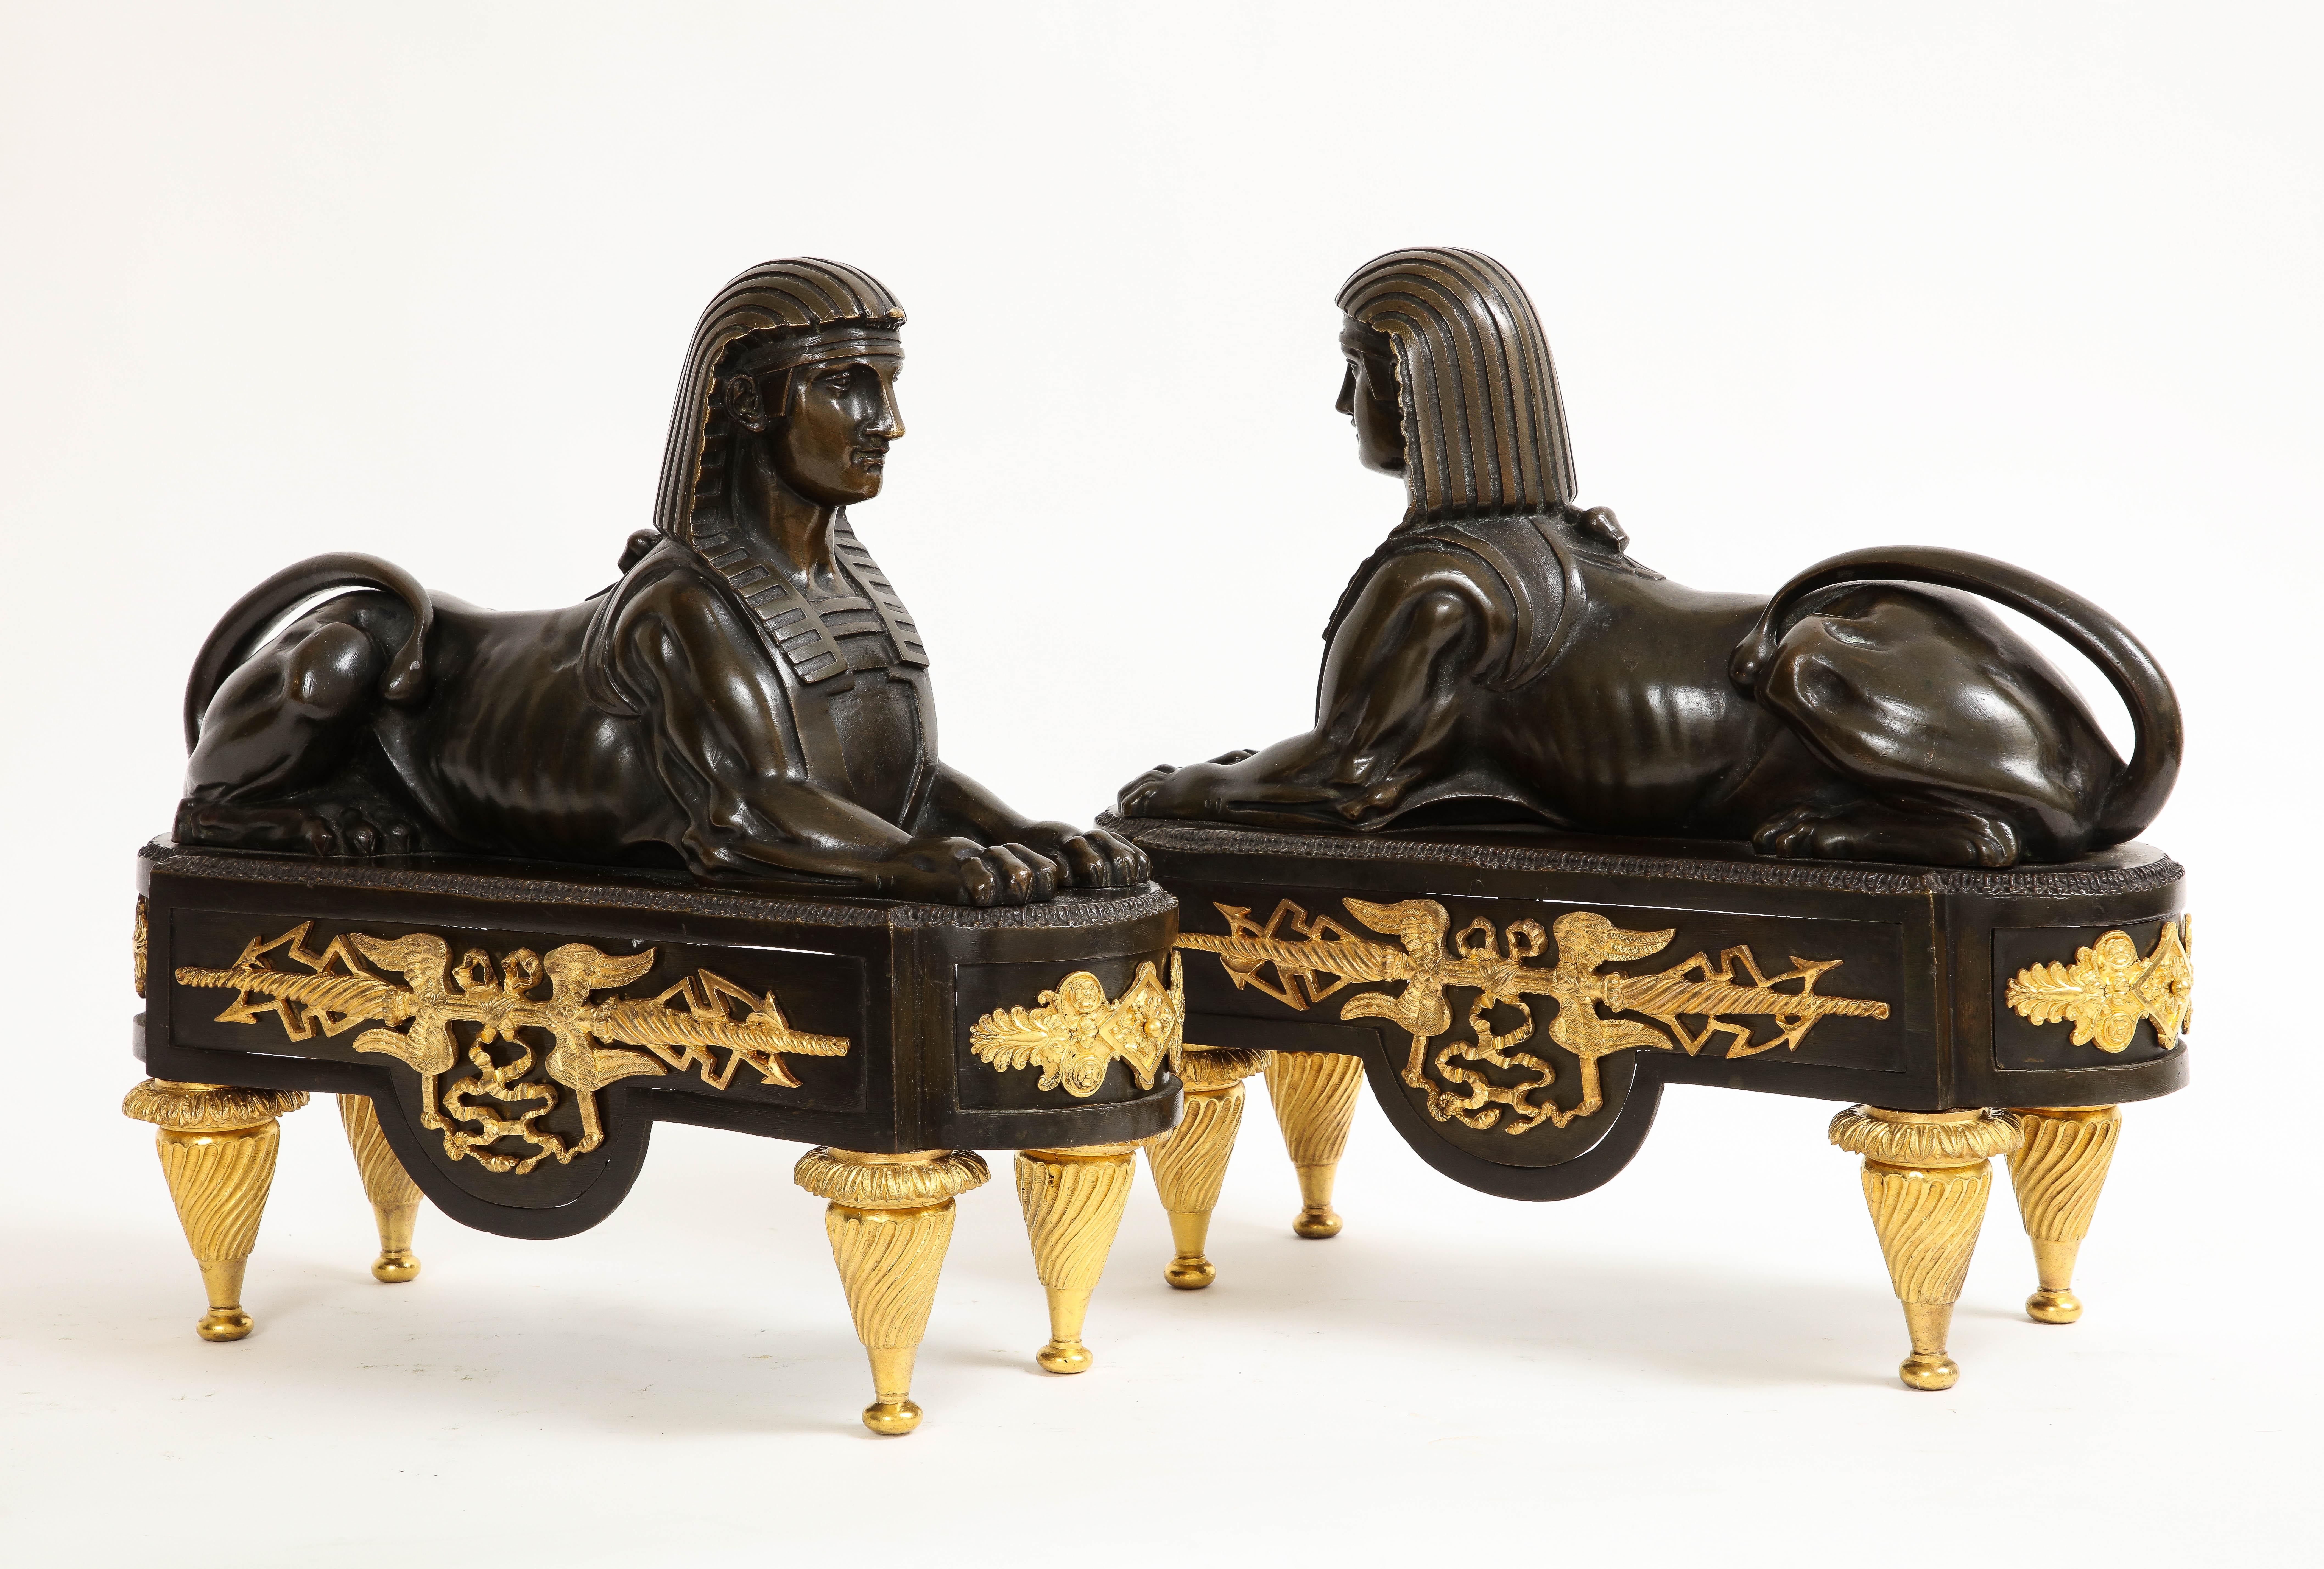 Gilt Pair of French Early 19th C. Patinated and Dore Bronze Egyptian Revival Chenets For Sale